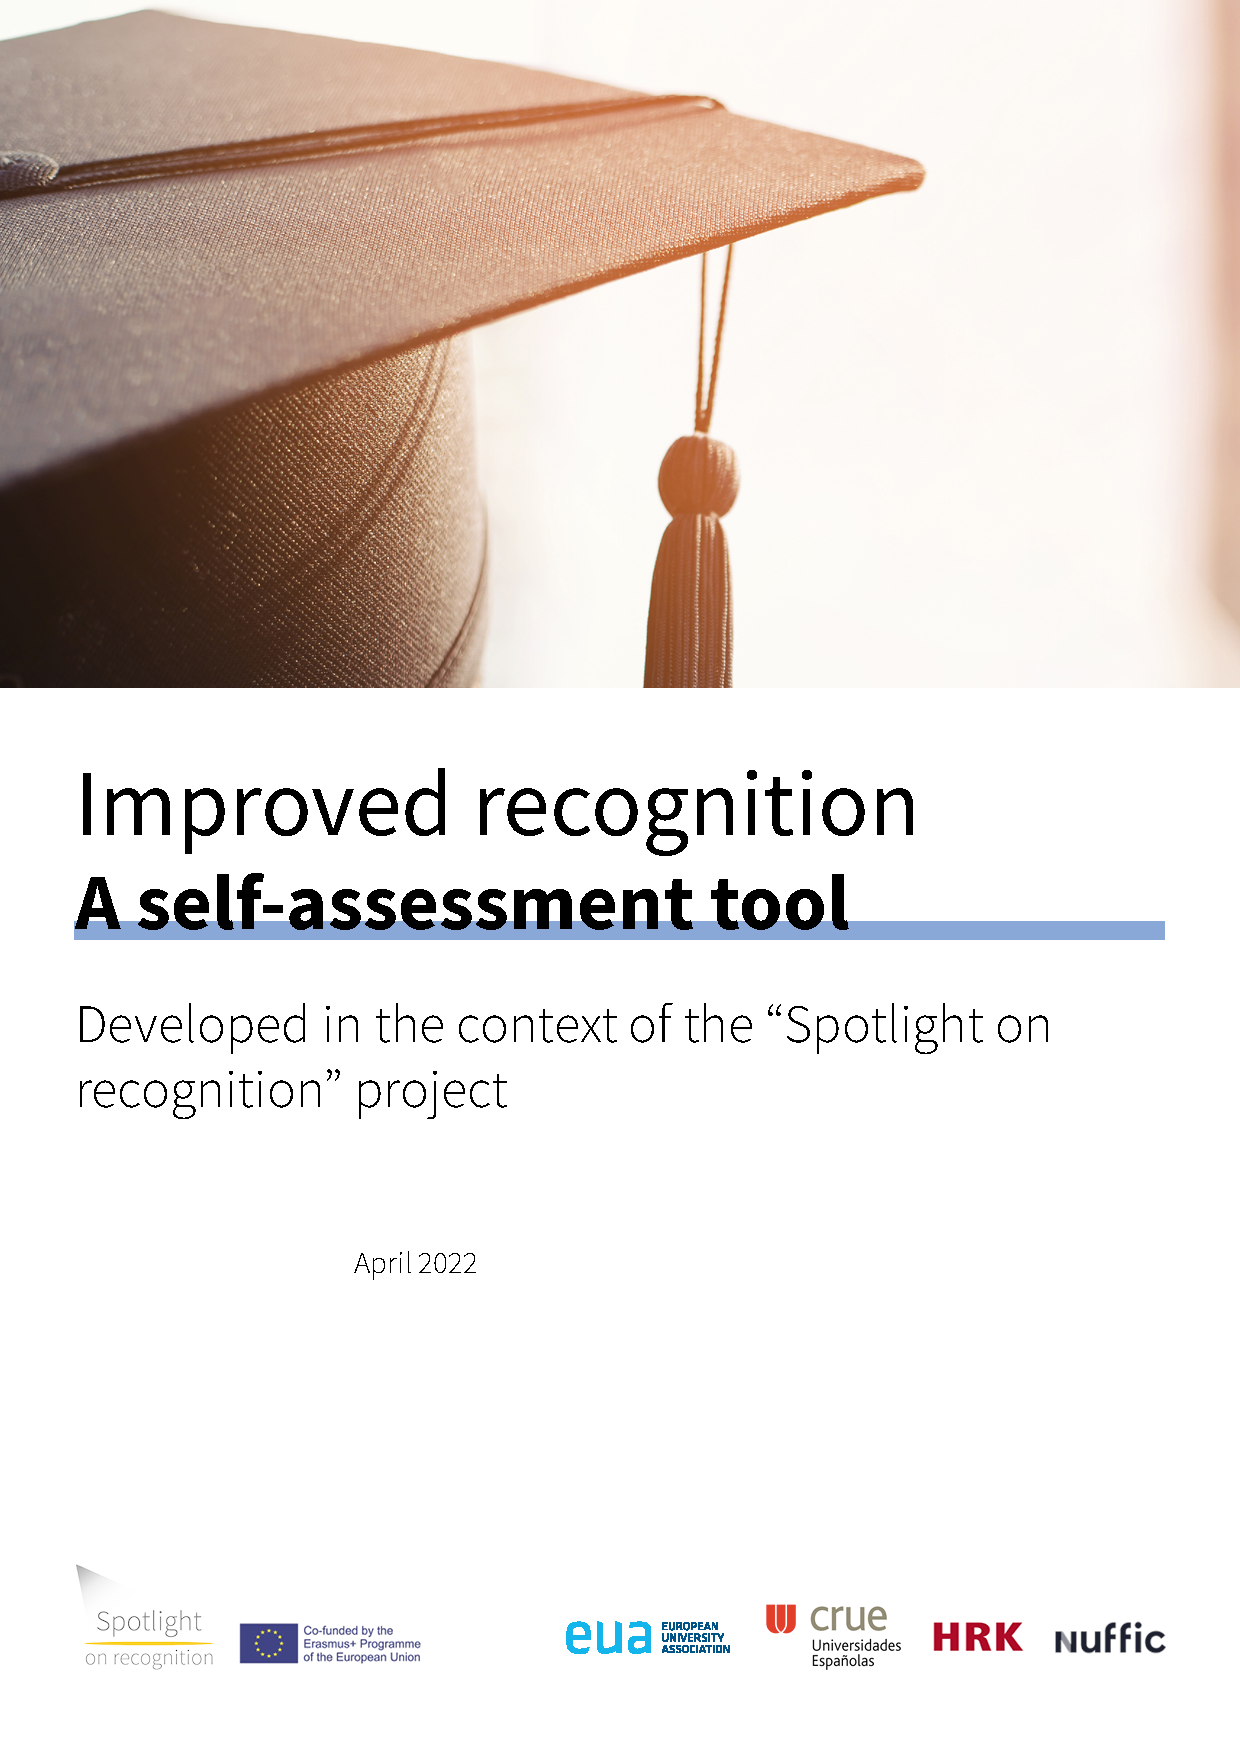 Improved recognition: A self-assessment tool